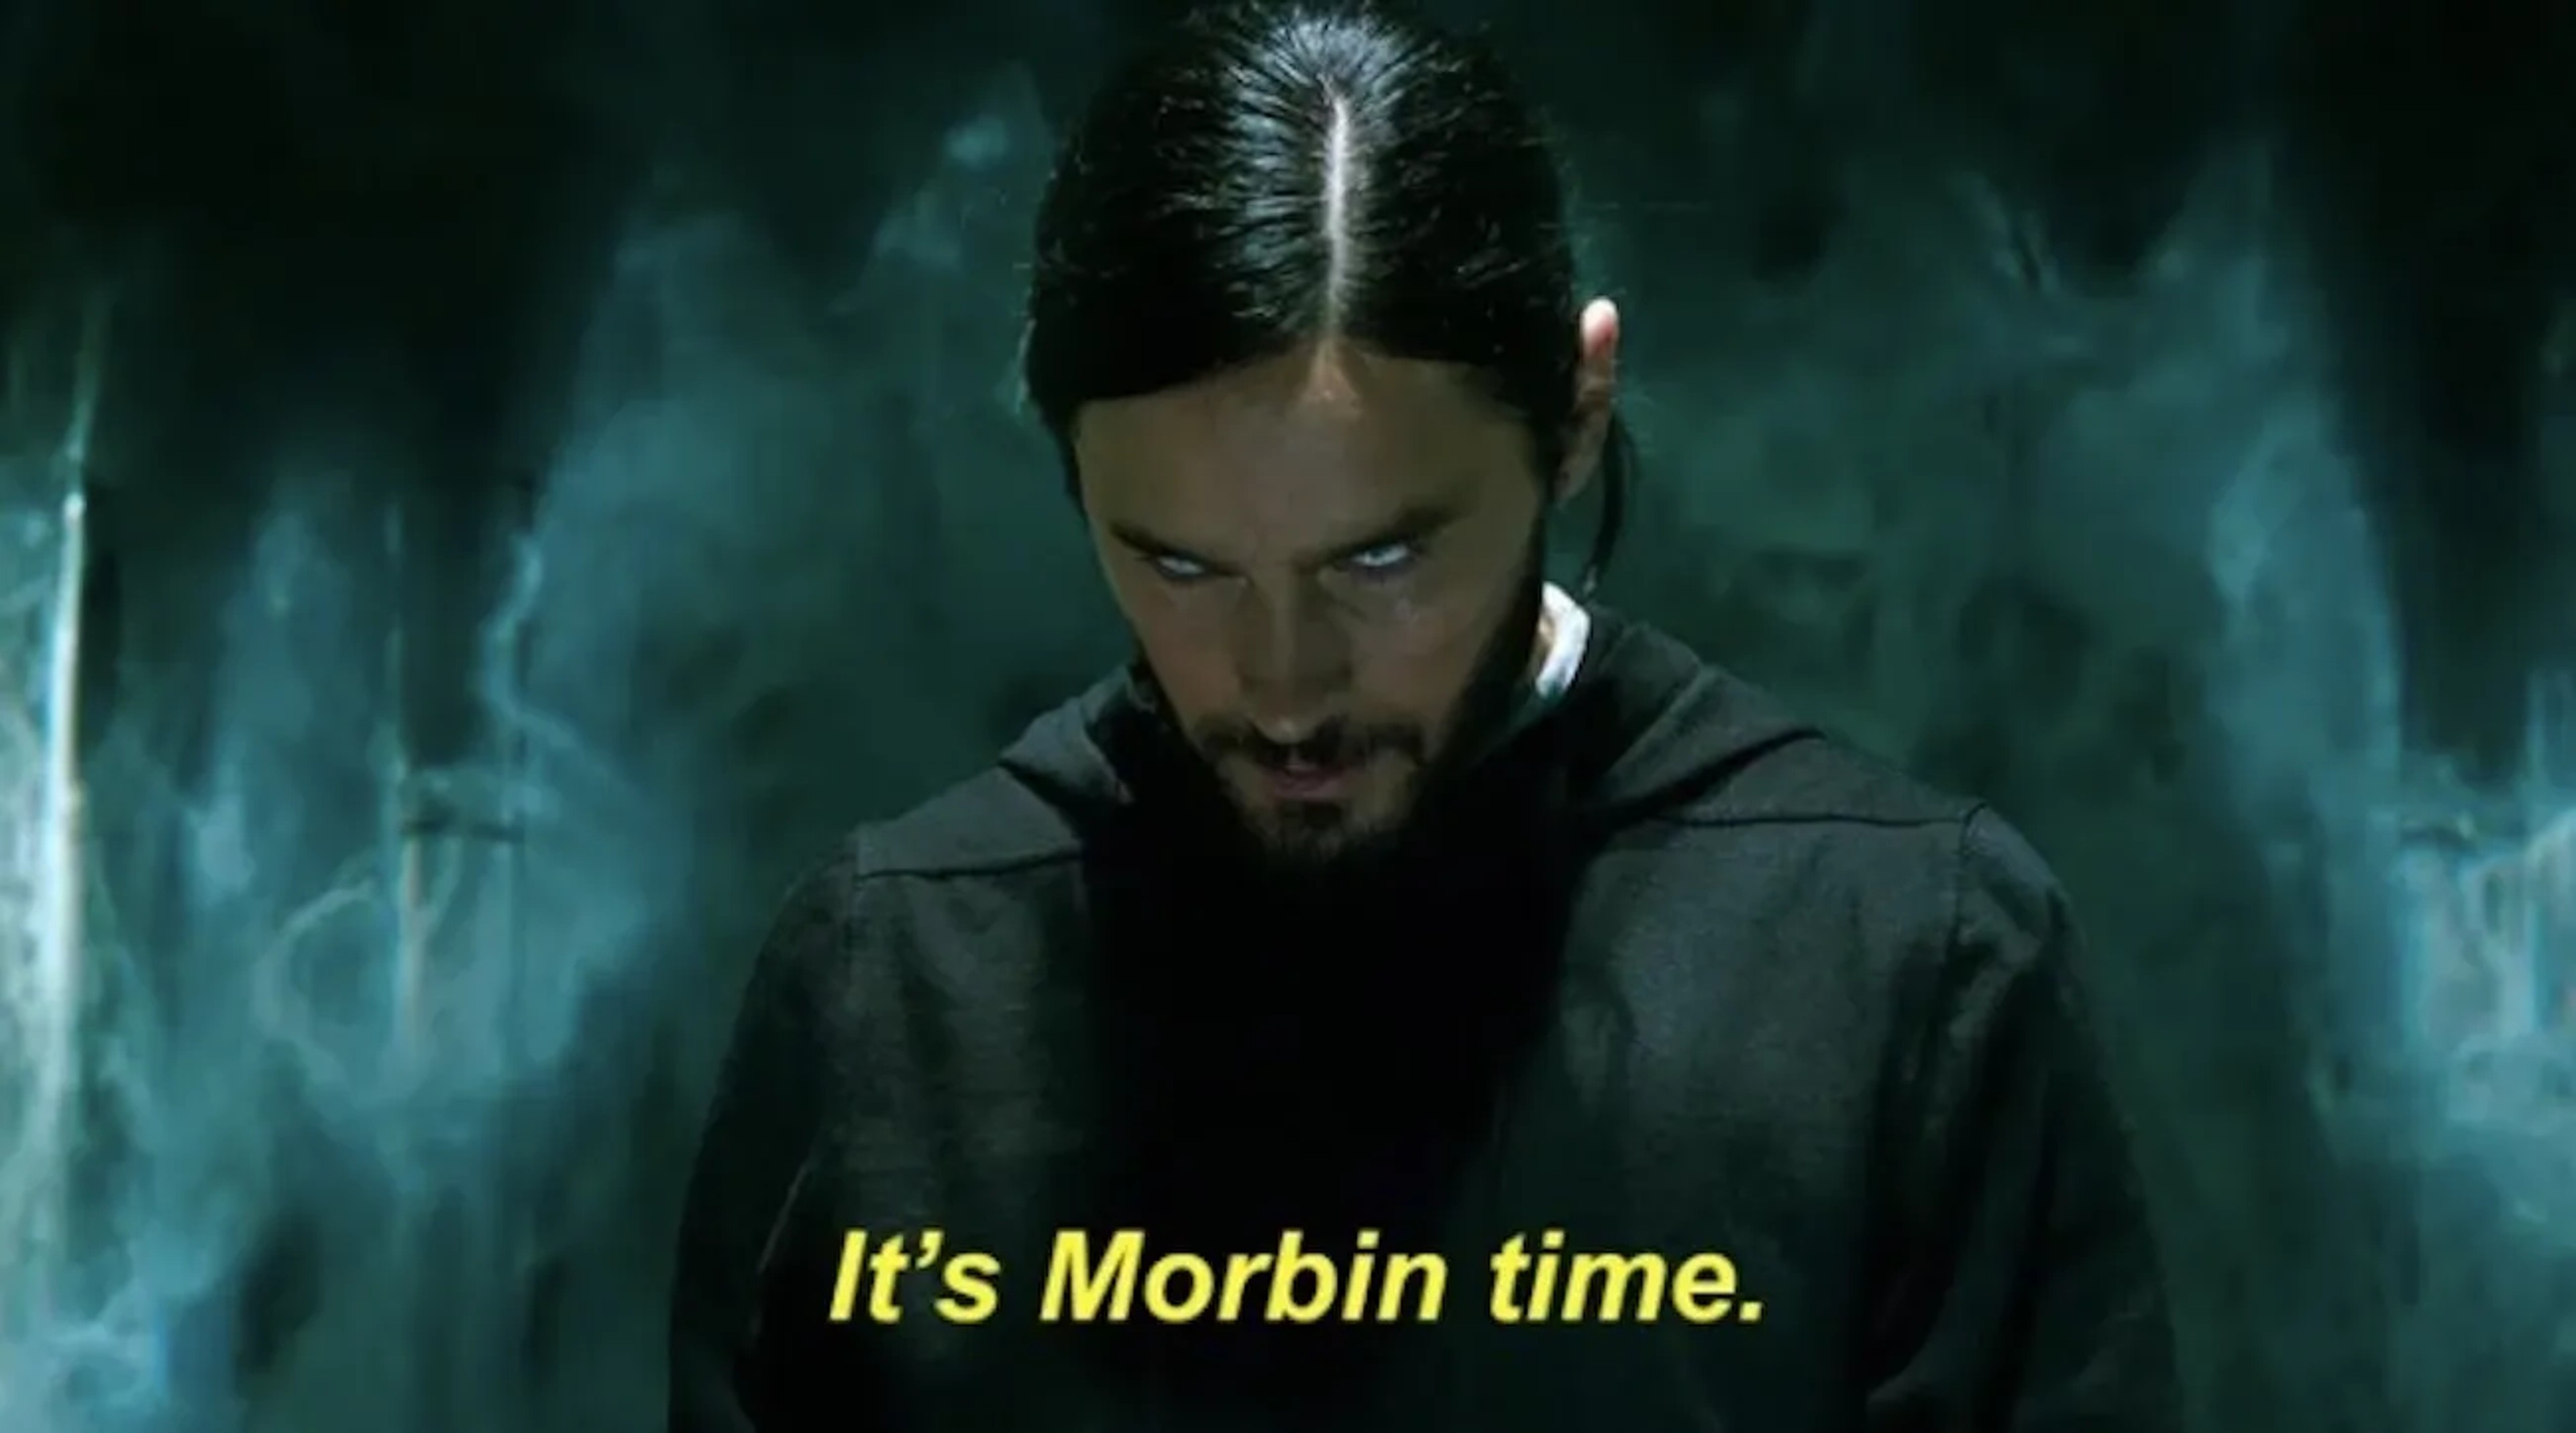 Morbious saying his infamous quote "It's Morbin time."